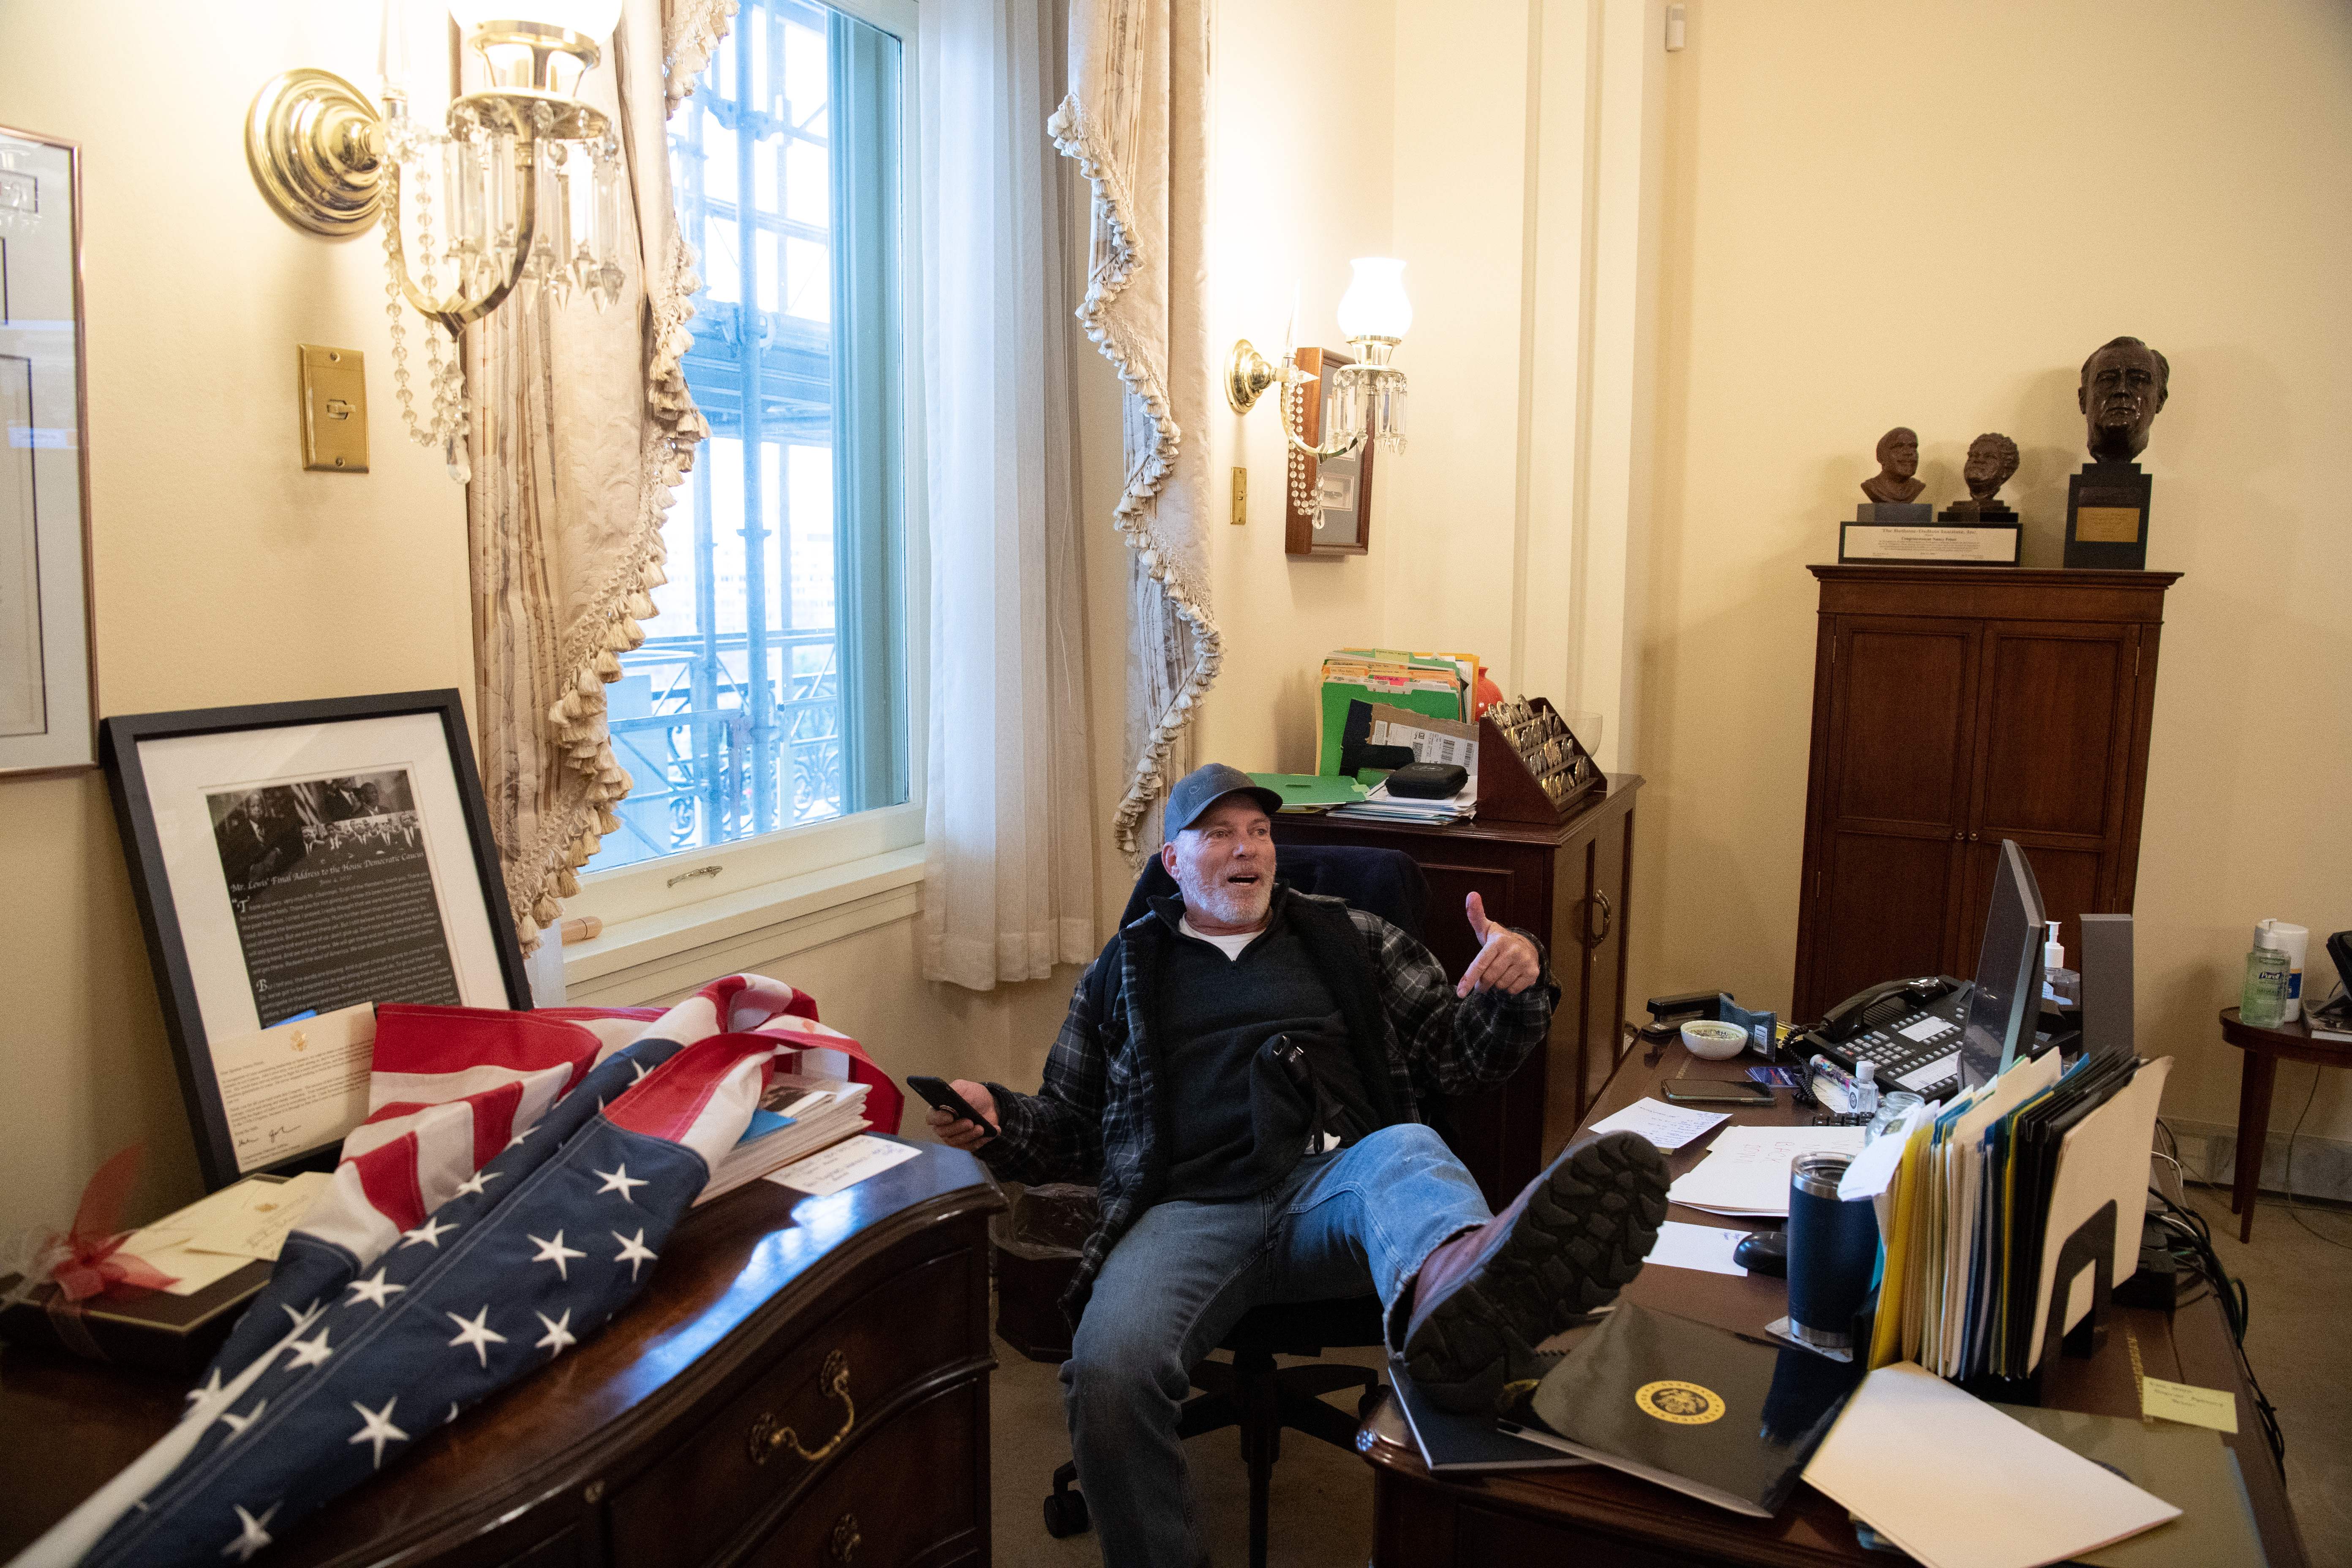 Capitol Hill rioters share photos at Nancy Pelosi's desk, others smoke in MAGA hats and pose for selfies